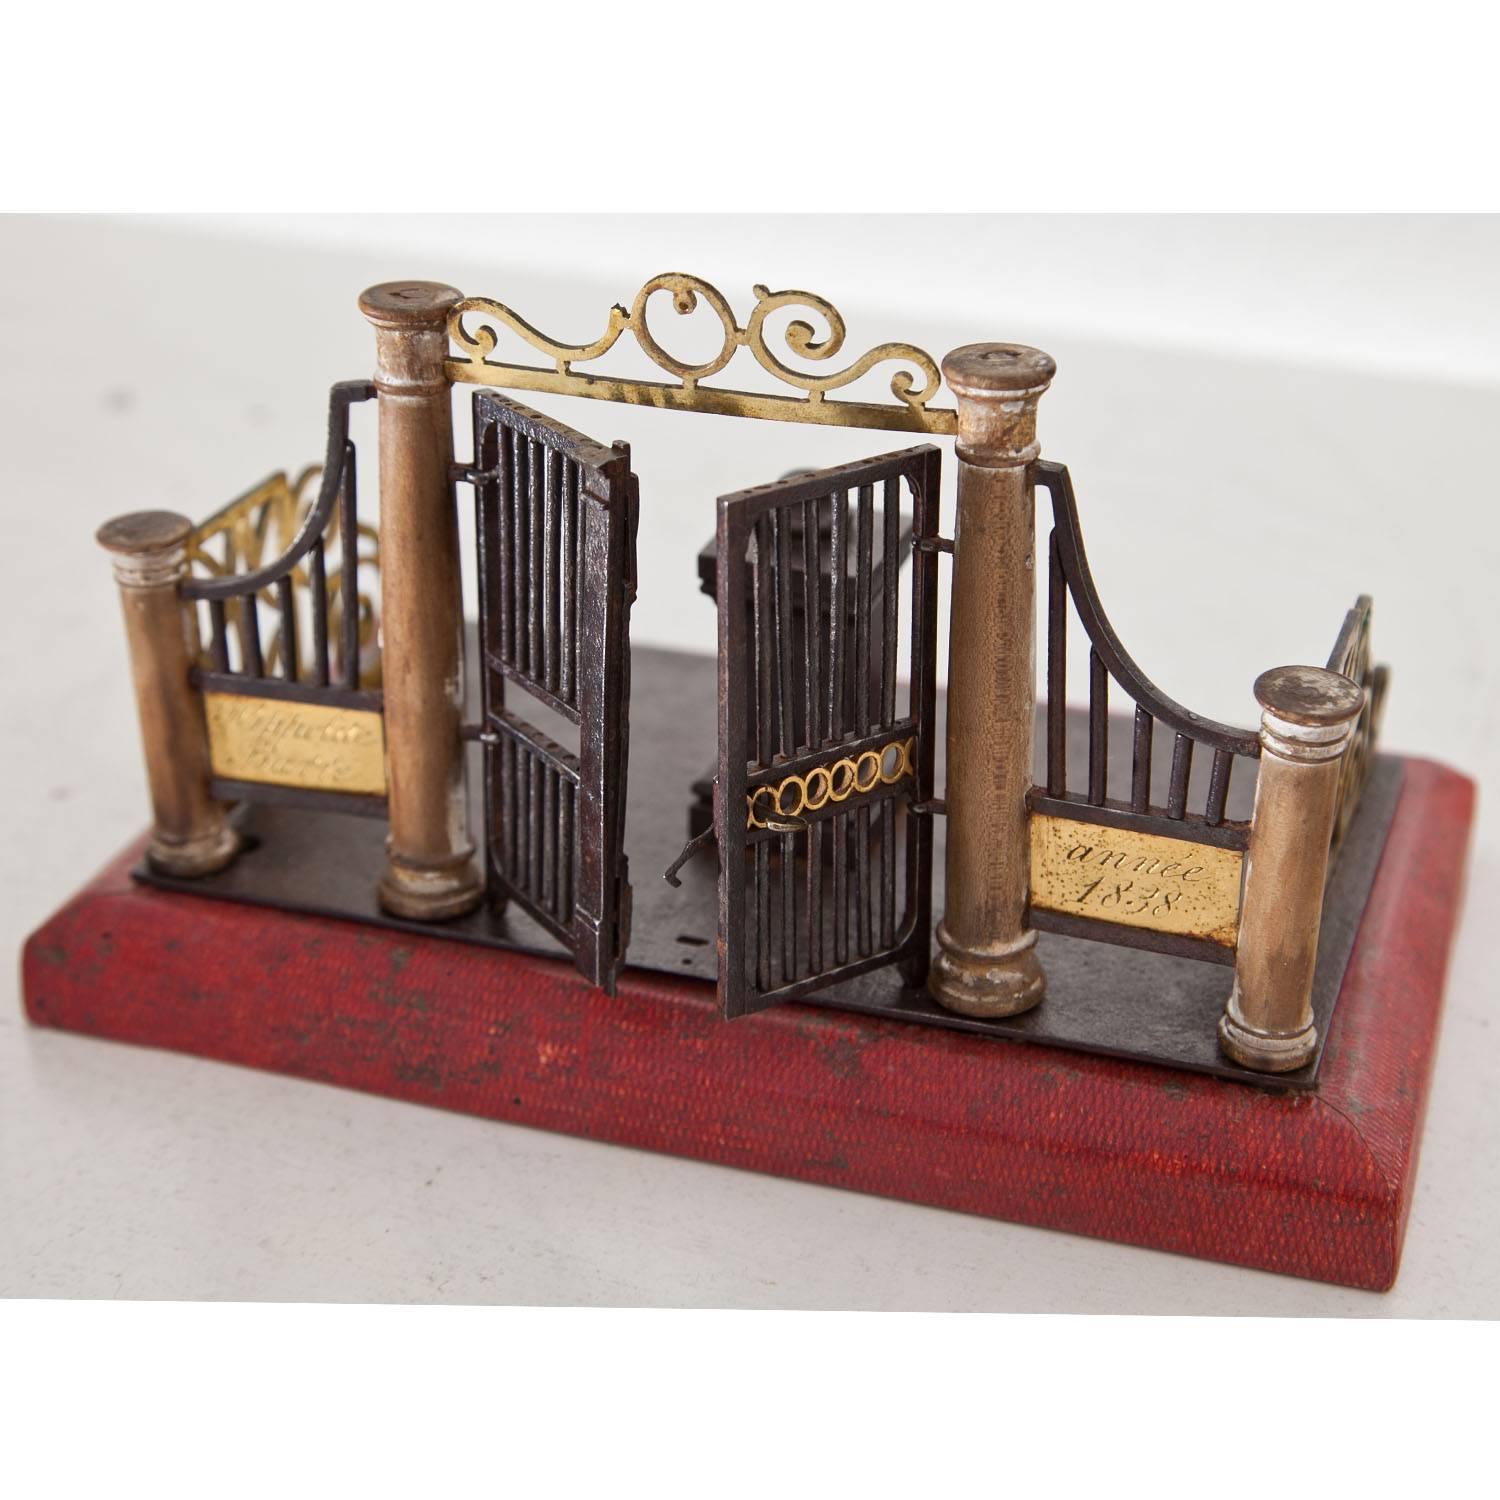 Brass Model of a Gate, France, Dated 1838